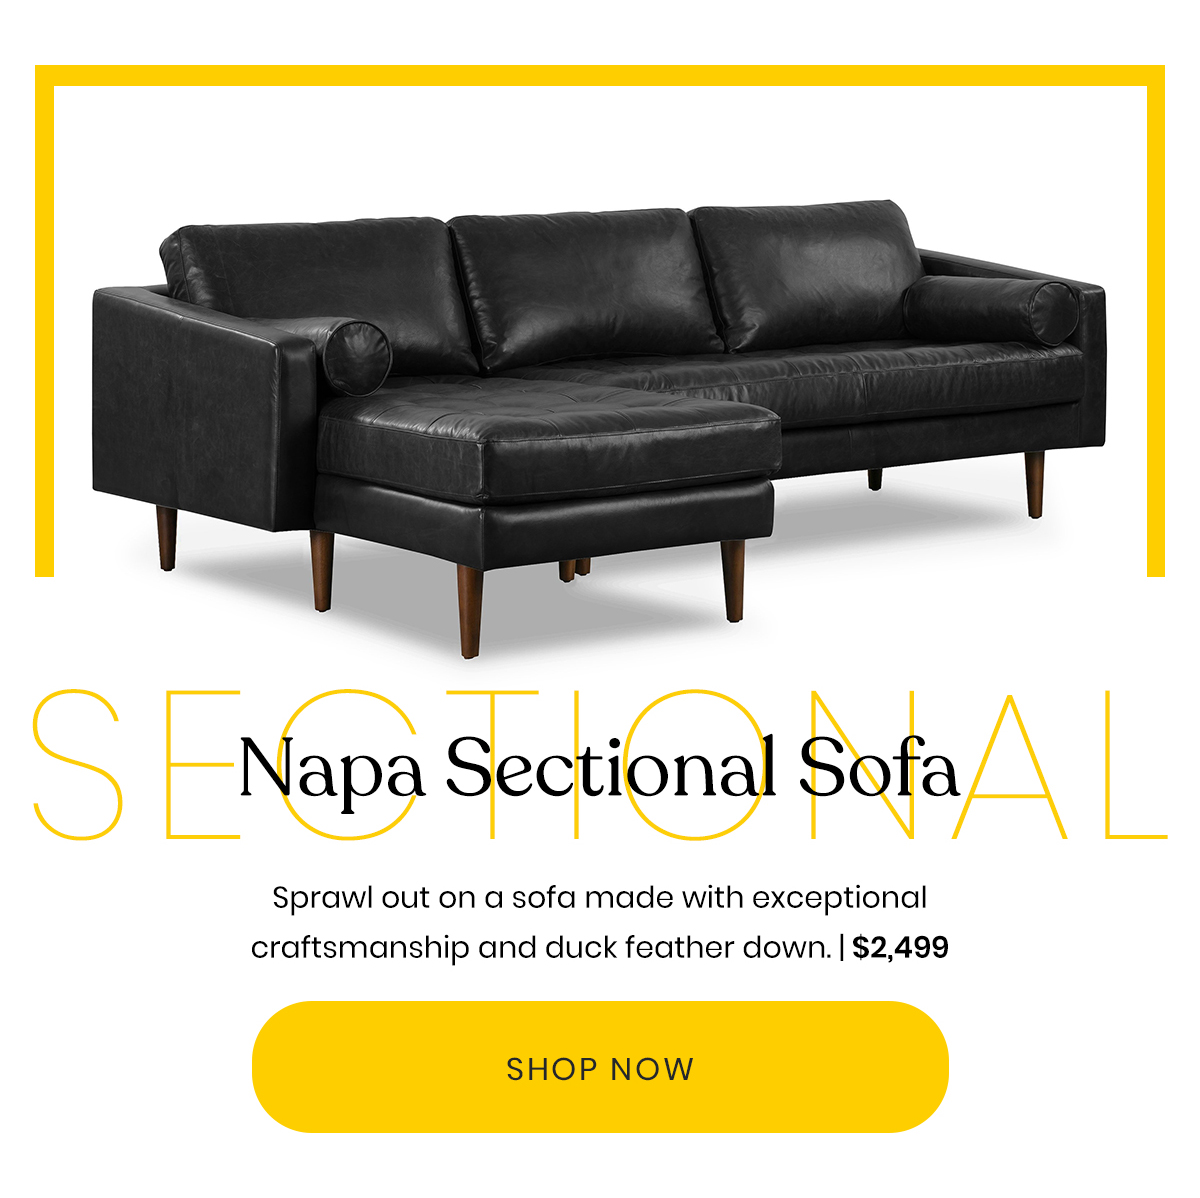 Napa Sectional Sofa | Sprawl out on a sofa made with exceptional craftsmanship and duck feather down. | $2,499 | Shop Now